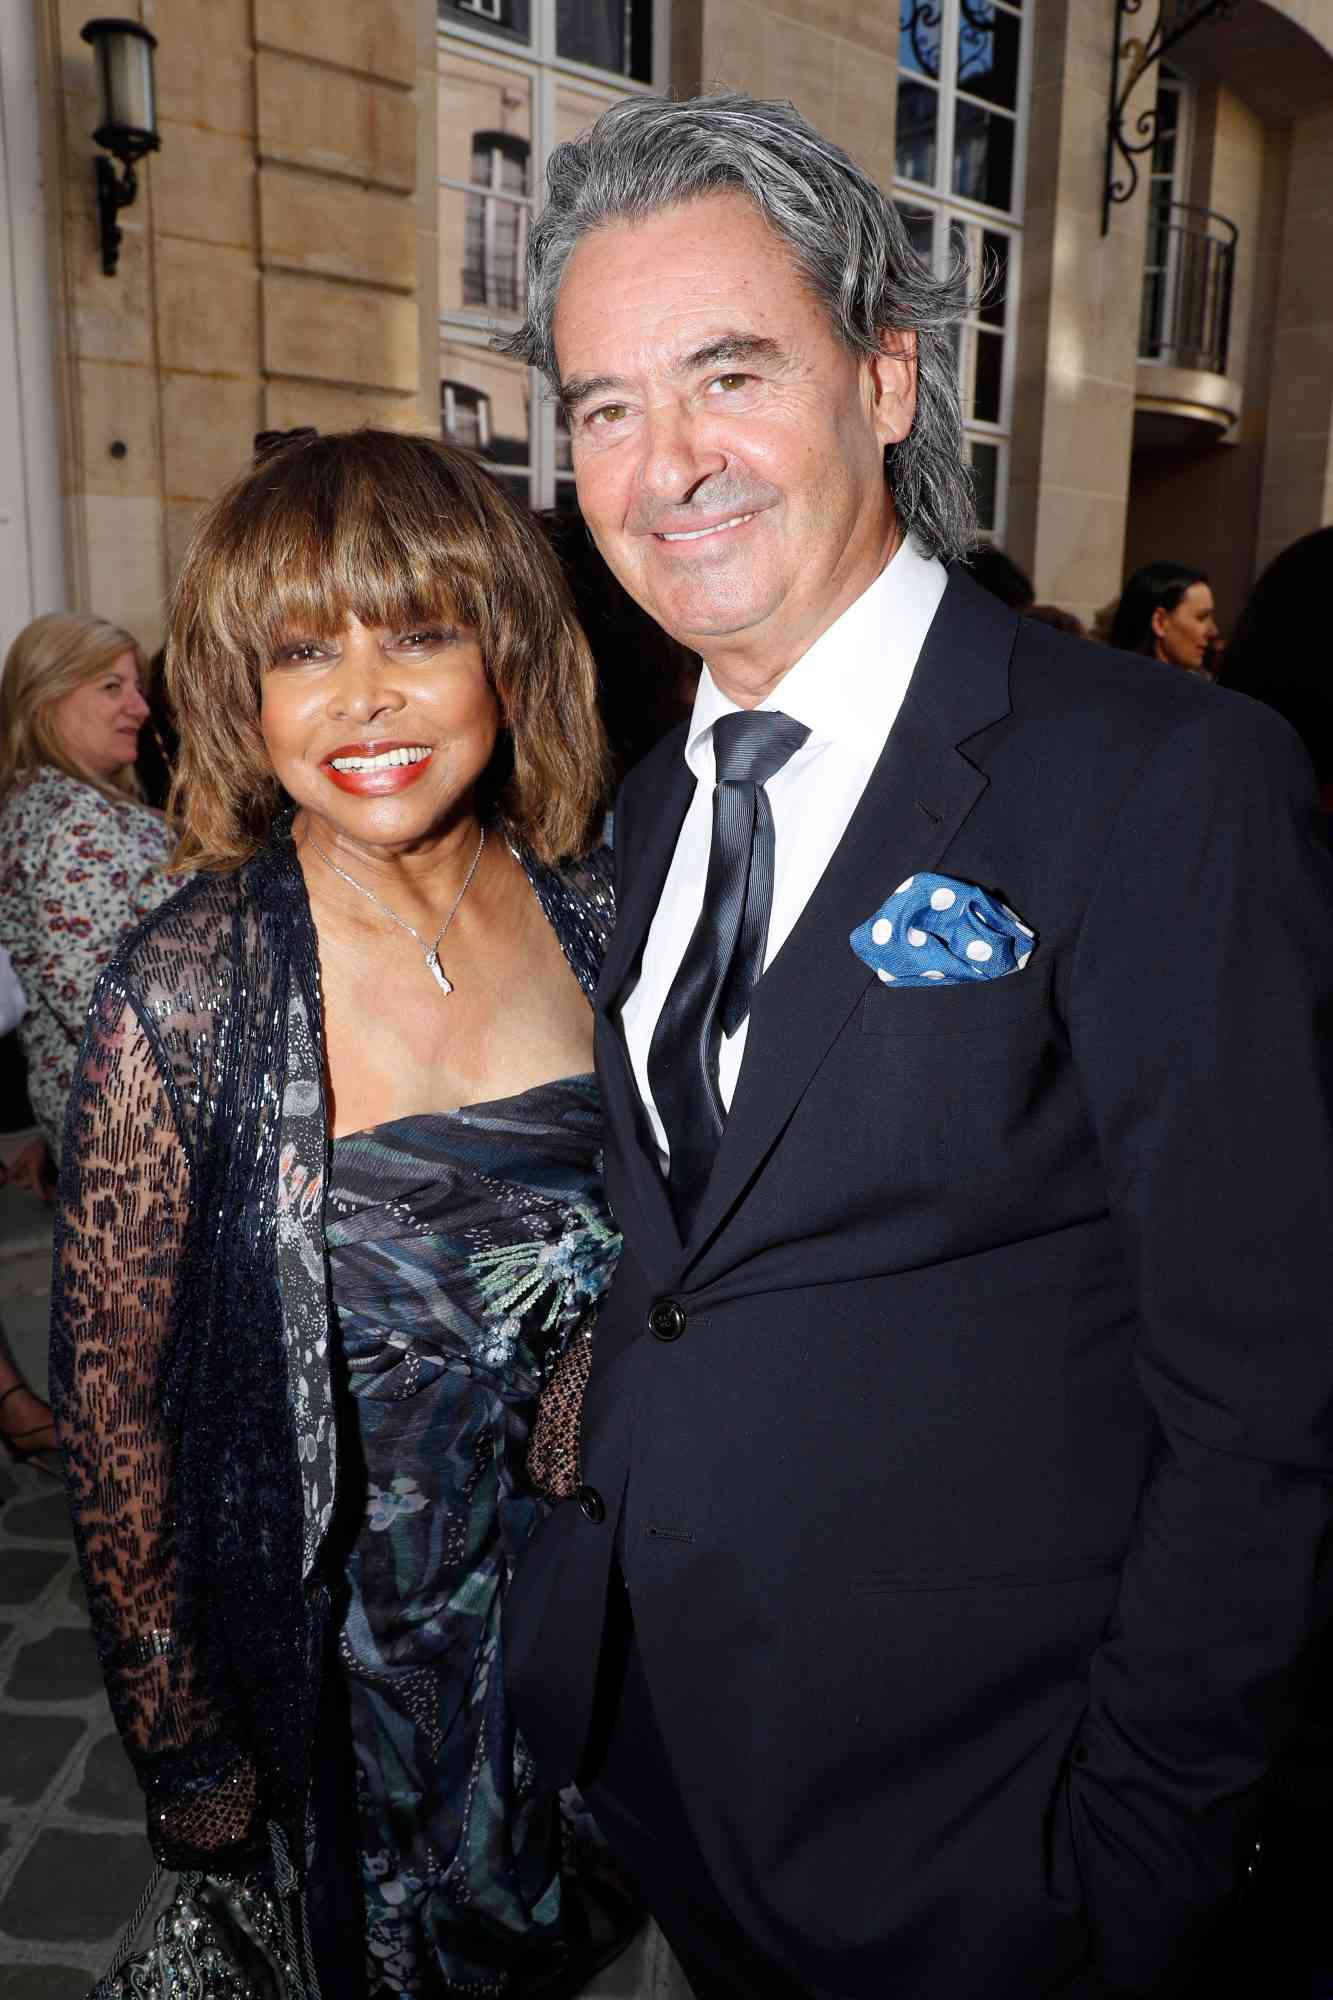 who is tina turner married to , who is in the executive branch